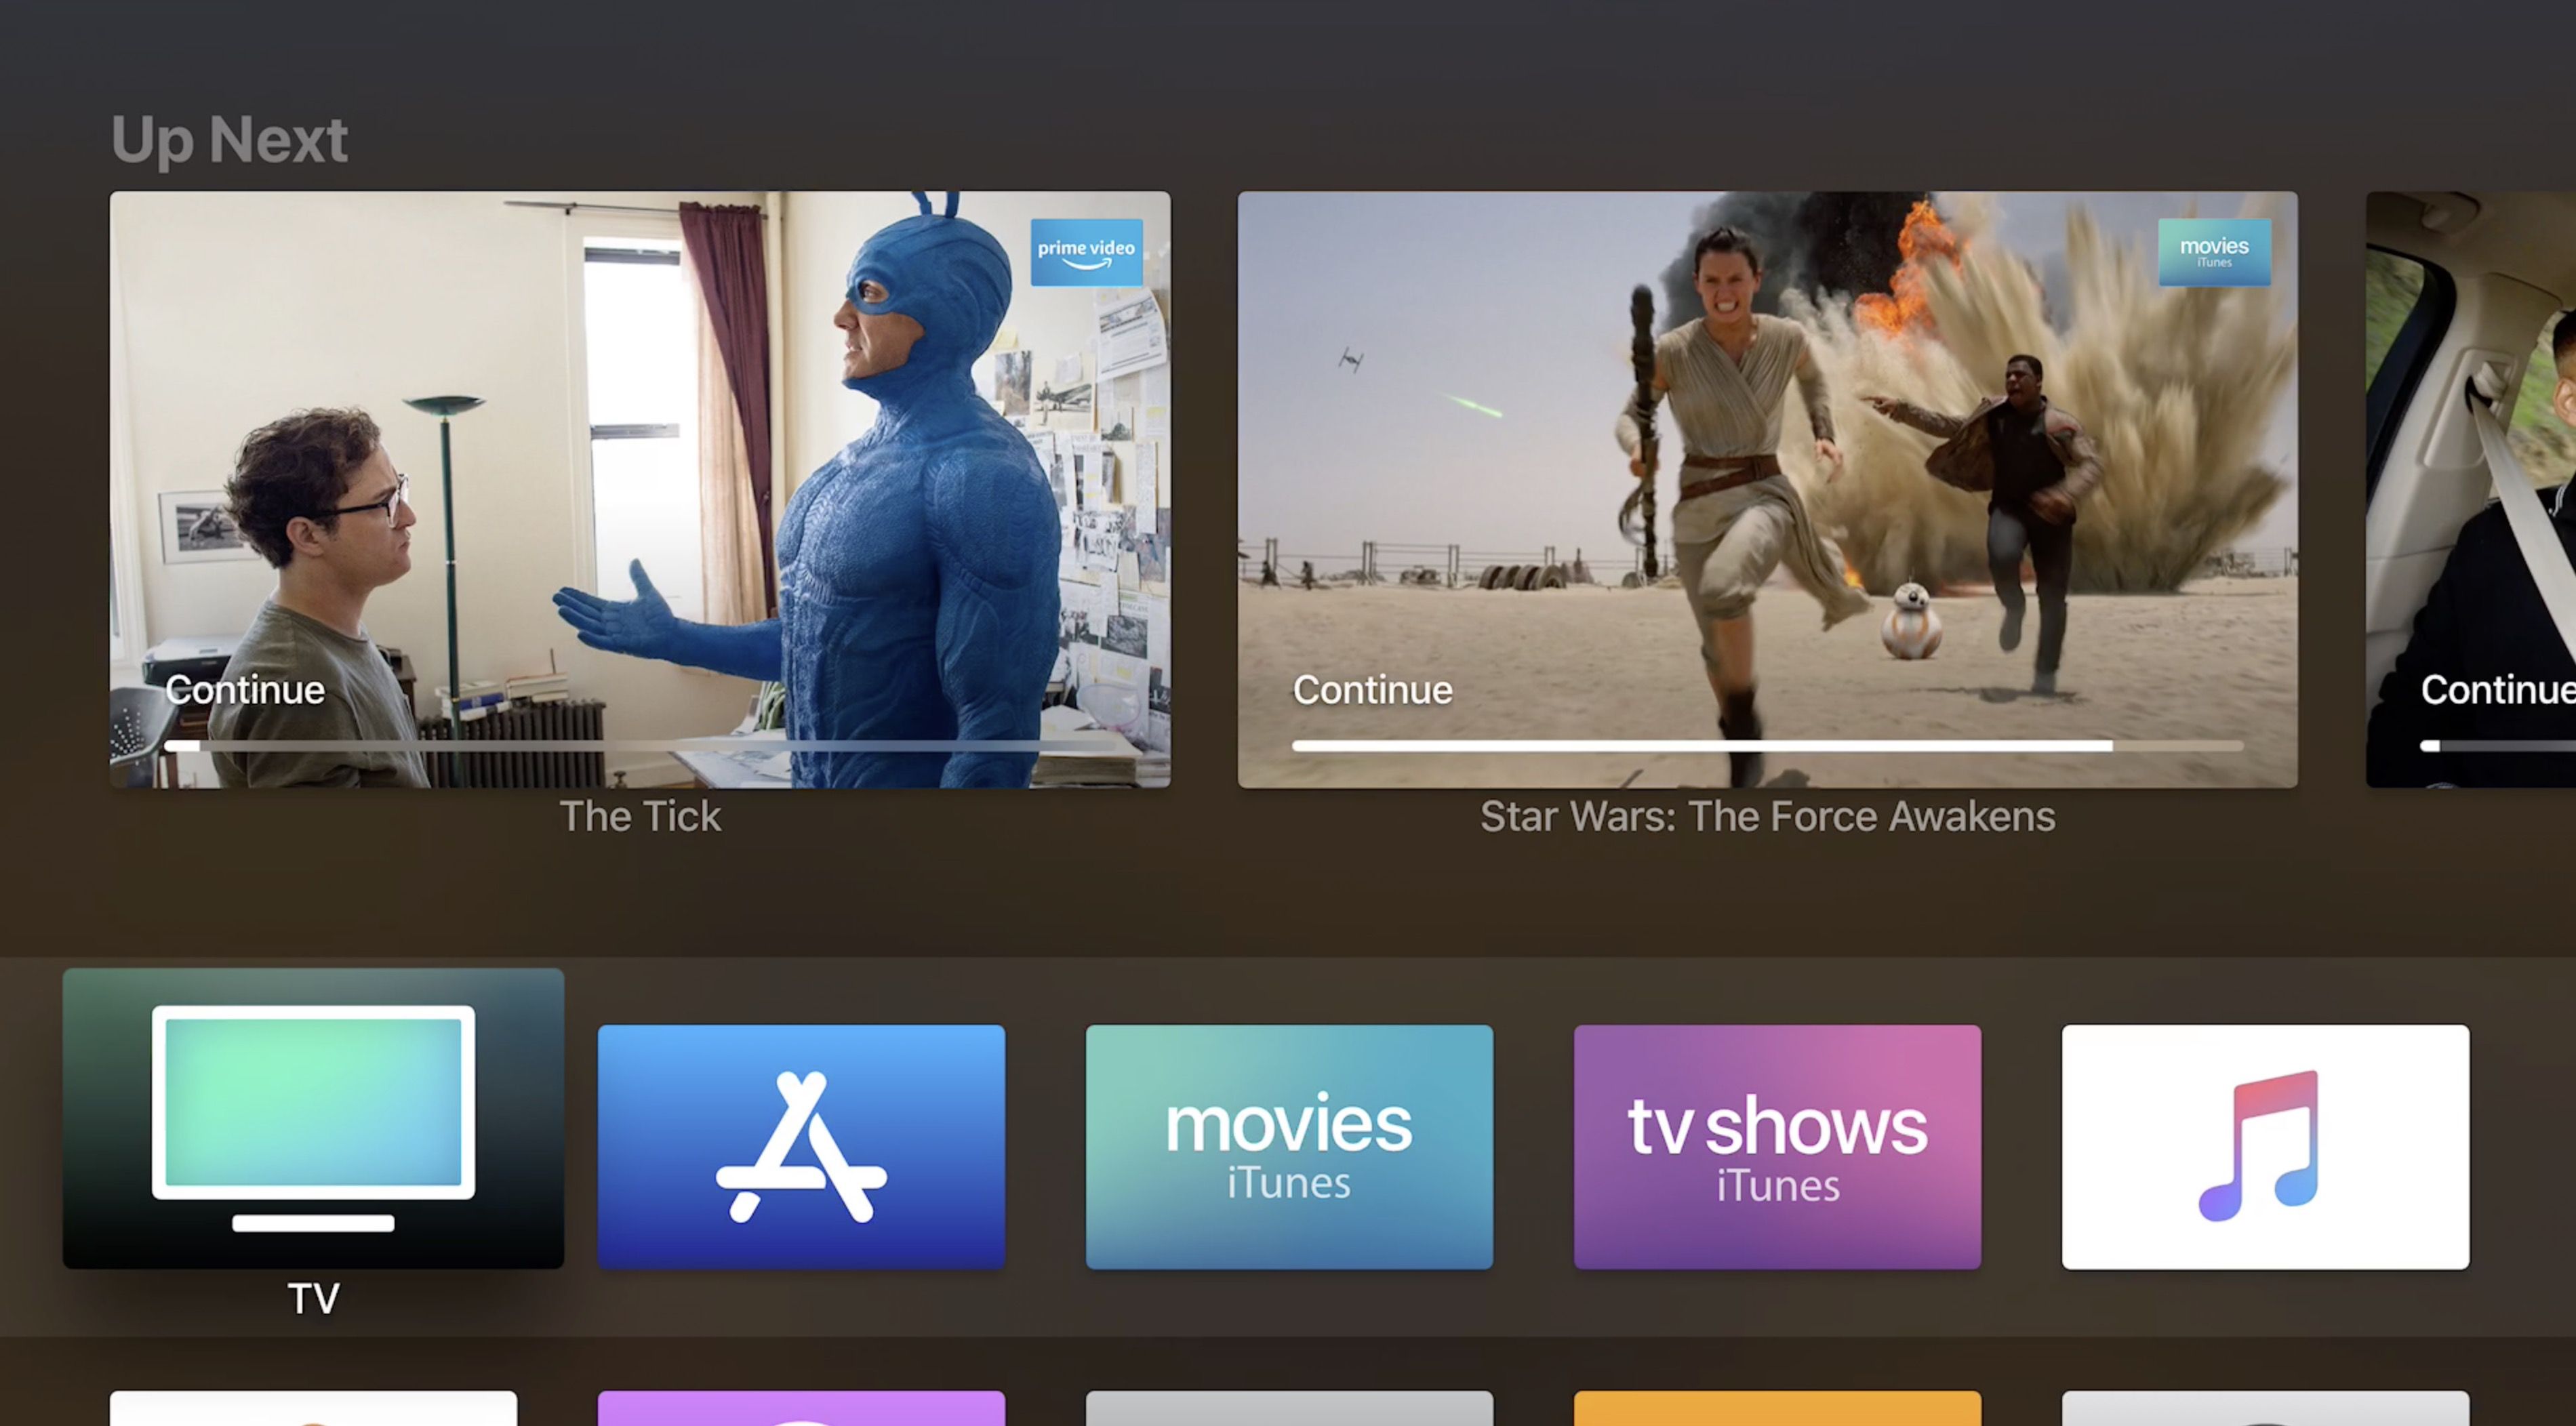 Apple And Amazon Confirm Amazon Prime Video On Tvos Supports 4k Hdr And Up Next In Tv App Macrumors